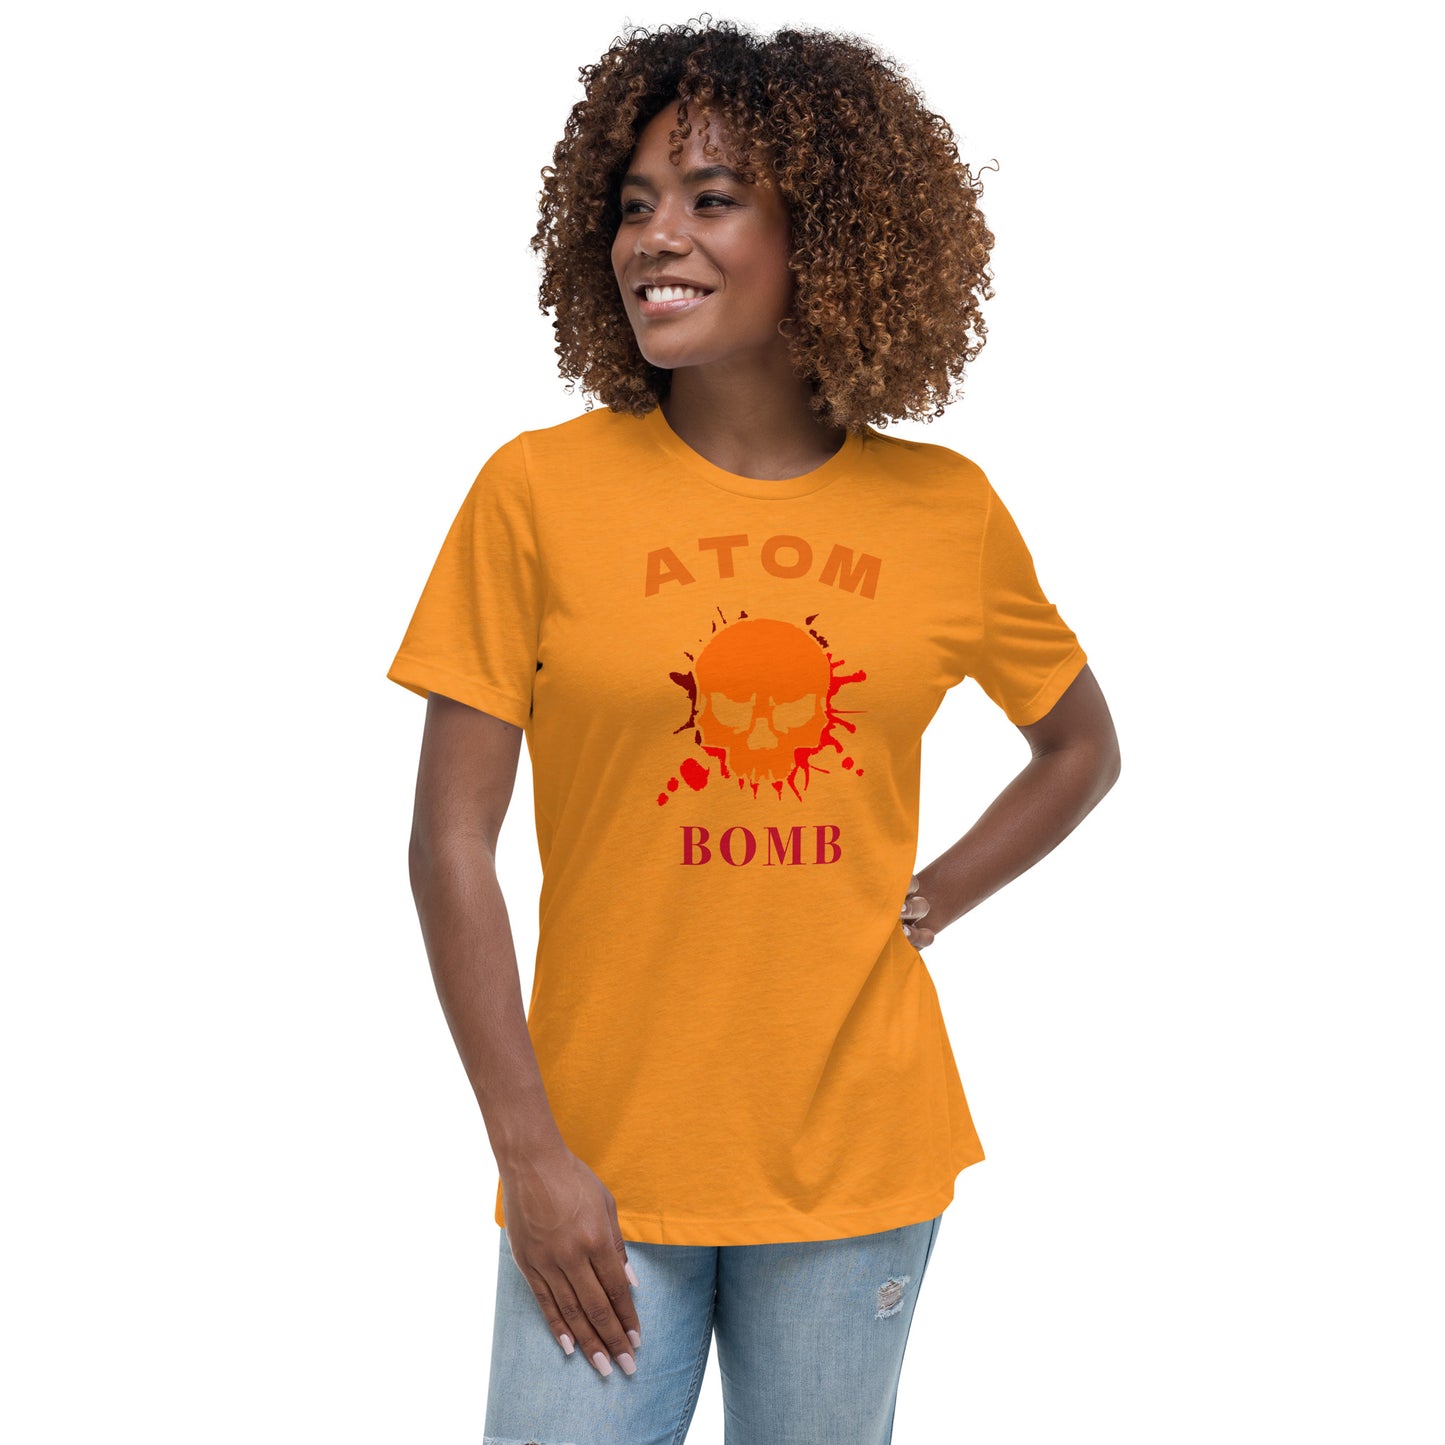 Anarchy Wear "Atom Bomb" By Atom Women's Relaxed T-Shirt